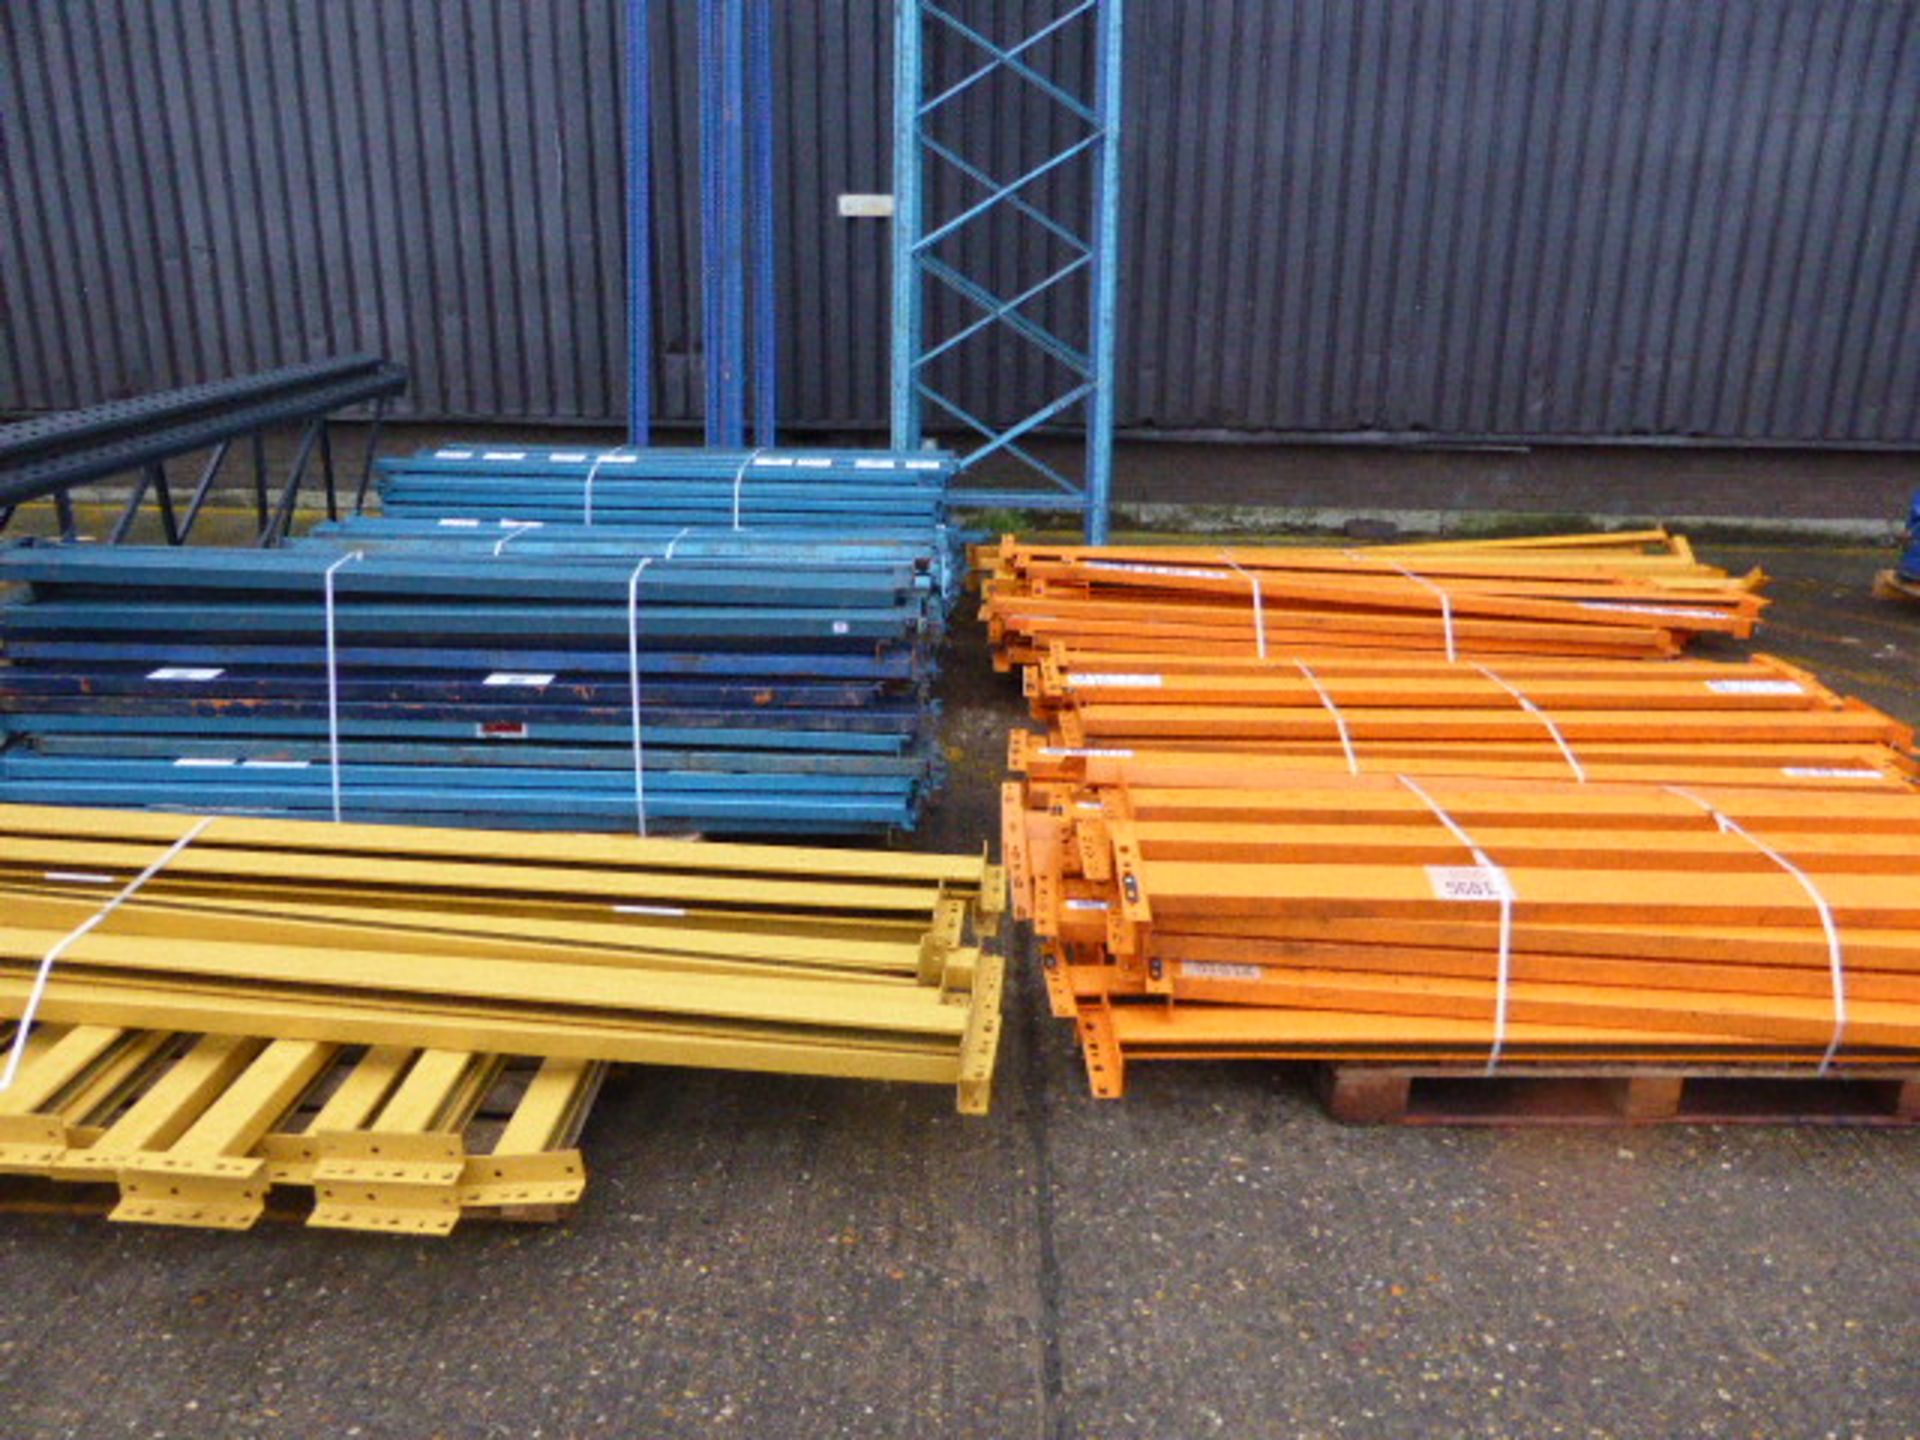 A range of miscellaneous Link 51, KS and Dexion Speedlock racking frames and beams in various sizes.